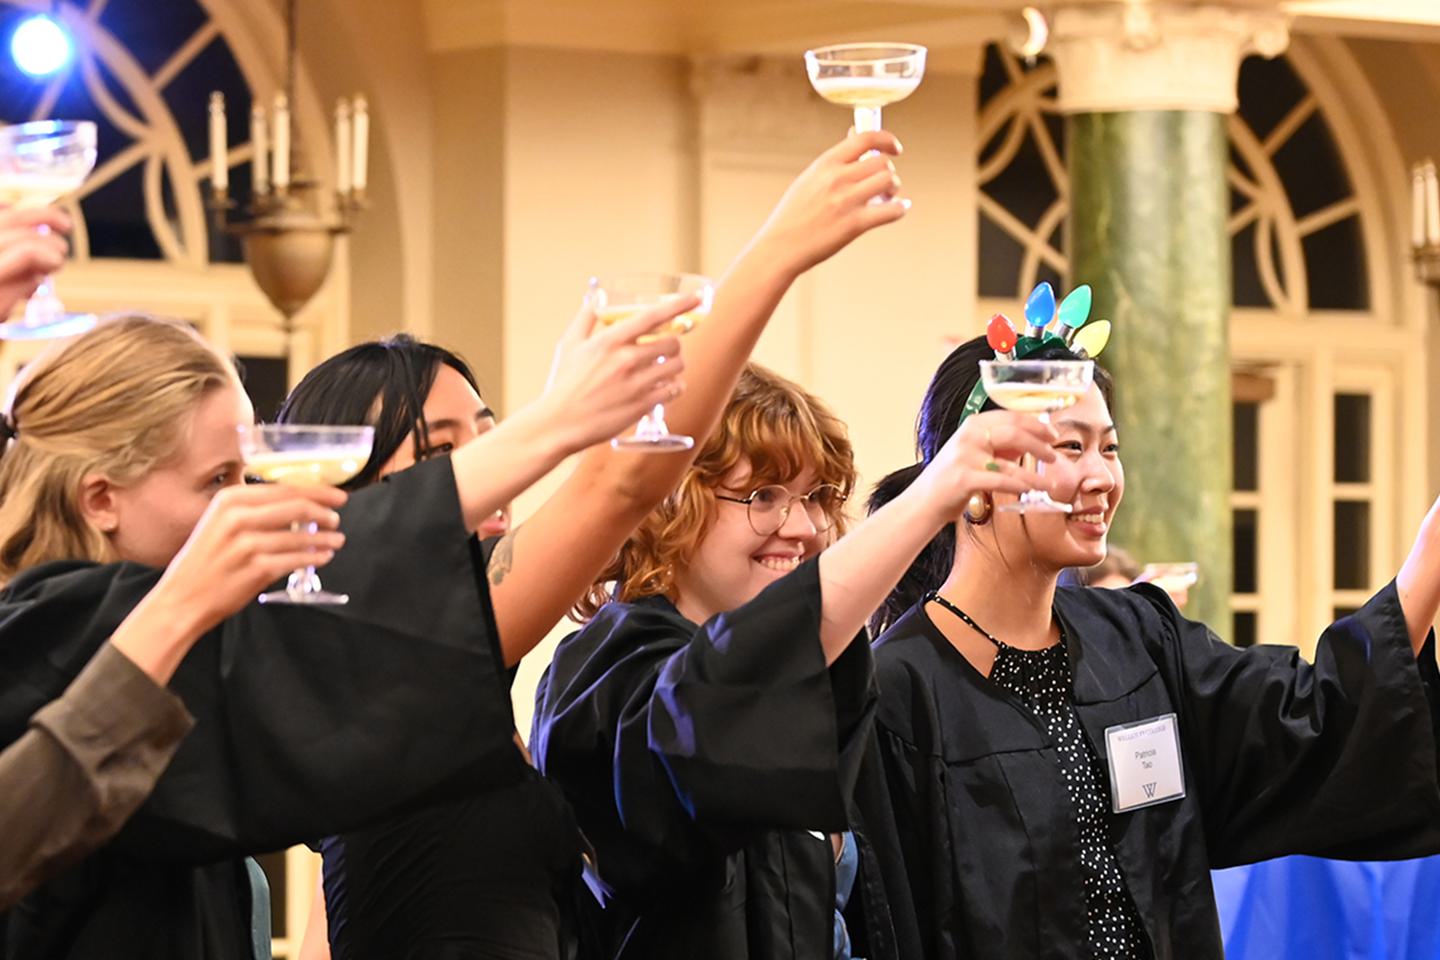 Students lift their glasses of sparkling juice in a toast.